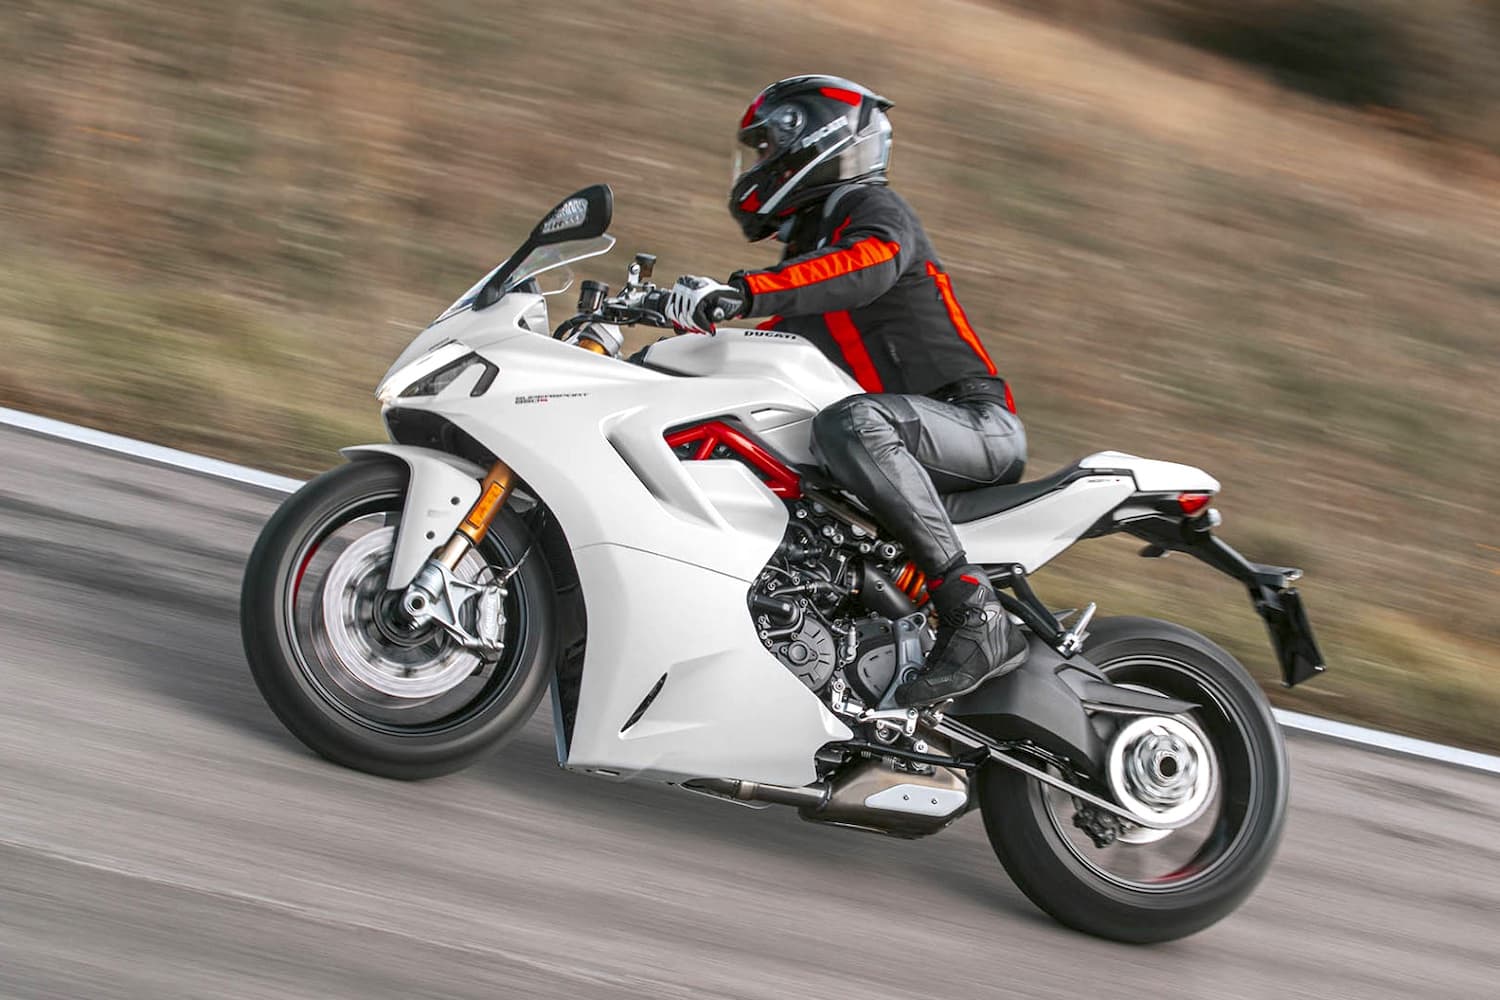 Sportbike riding position on a ducati supersport (LHS)